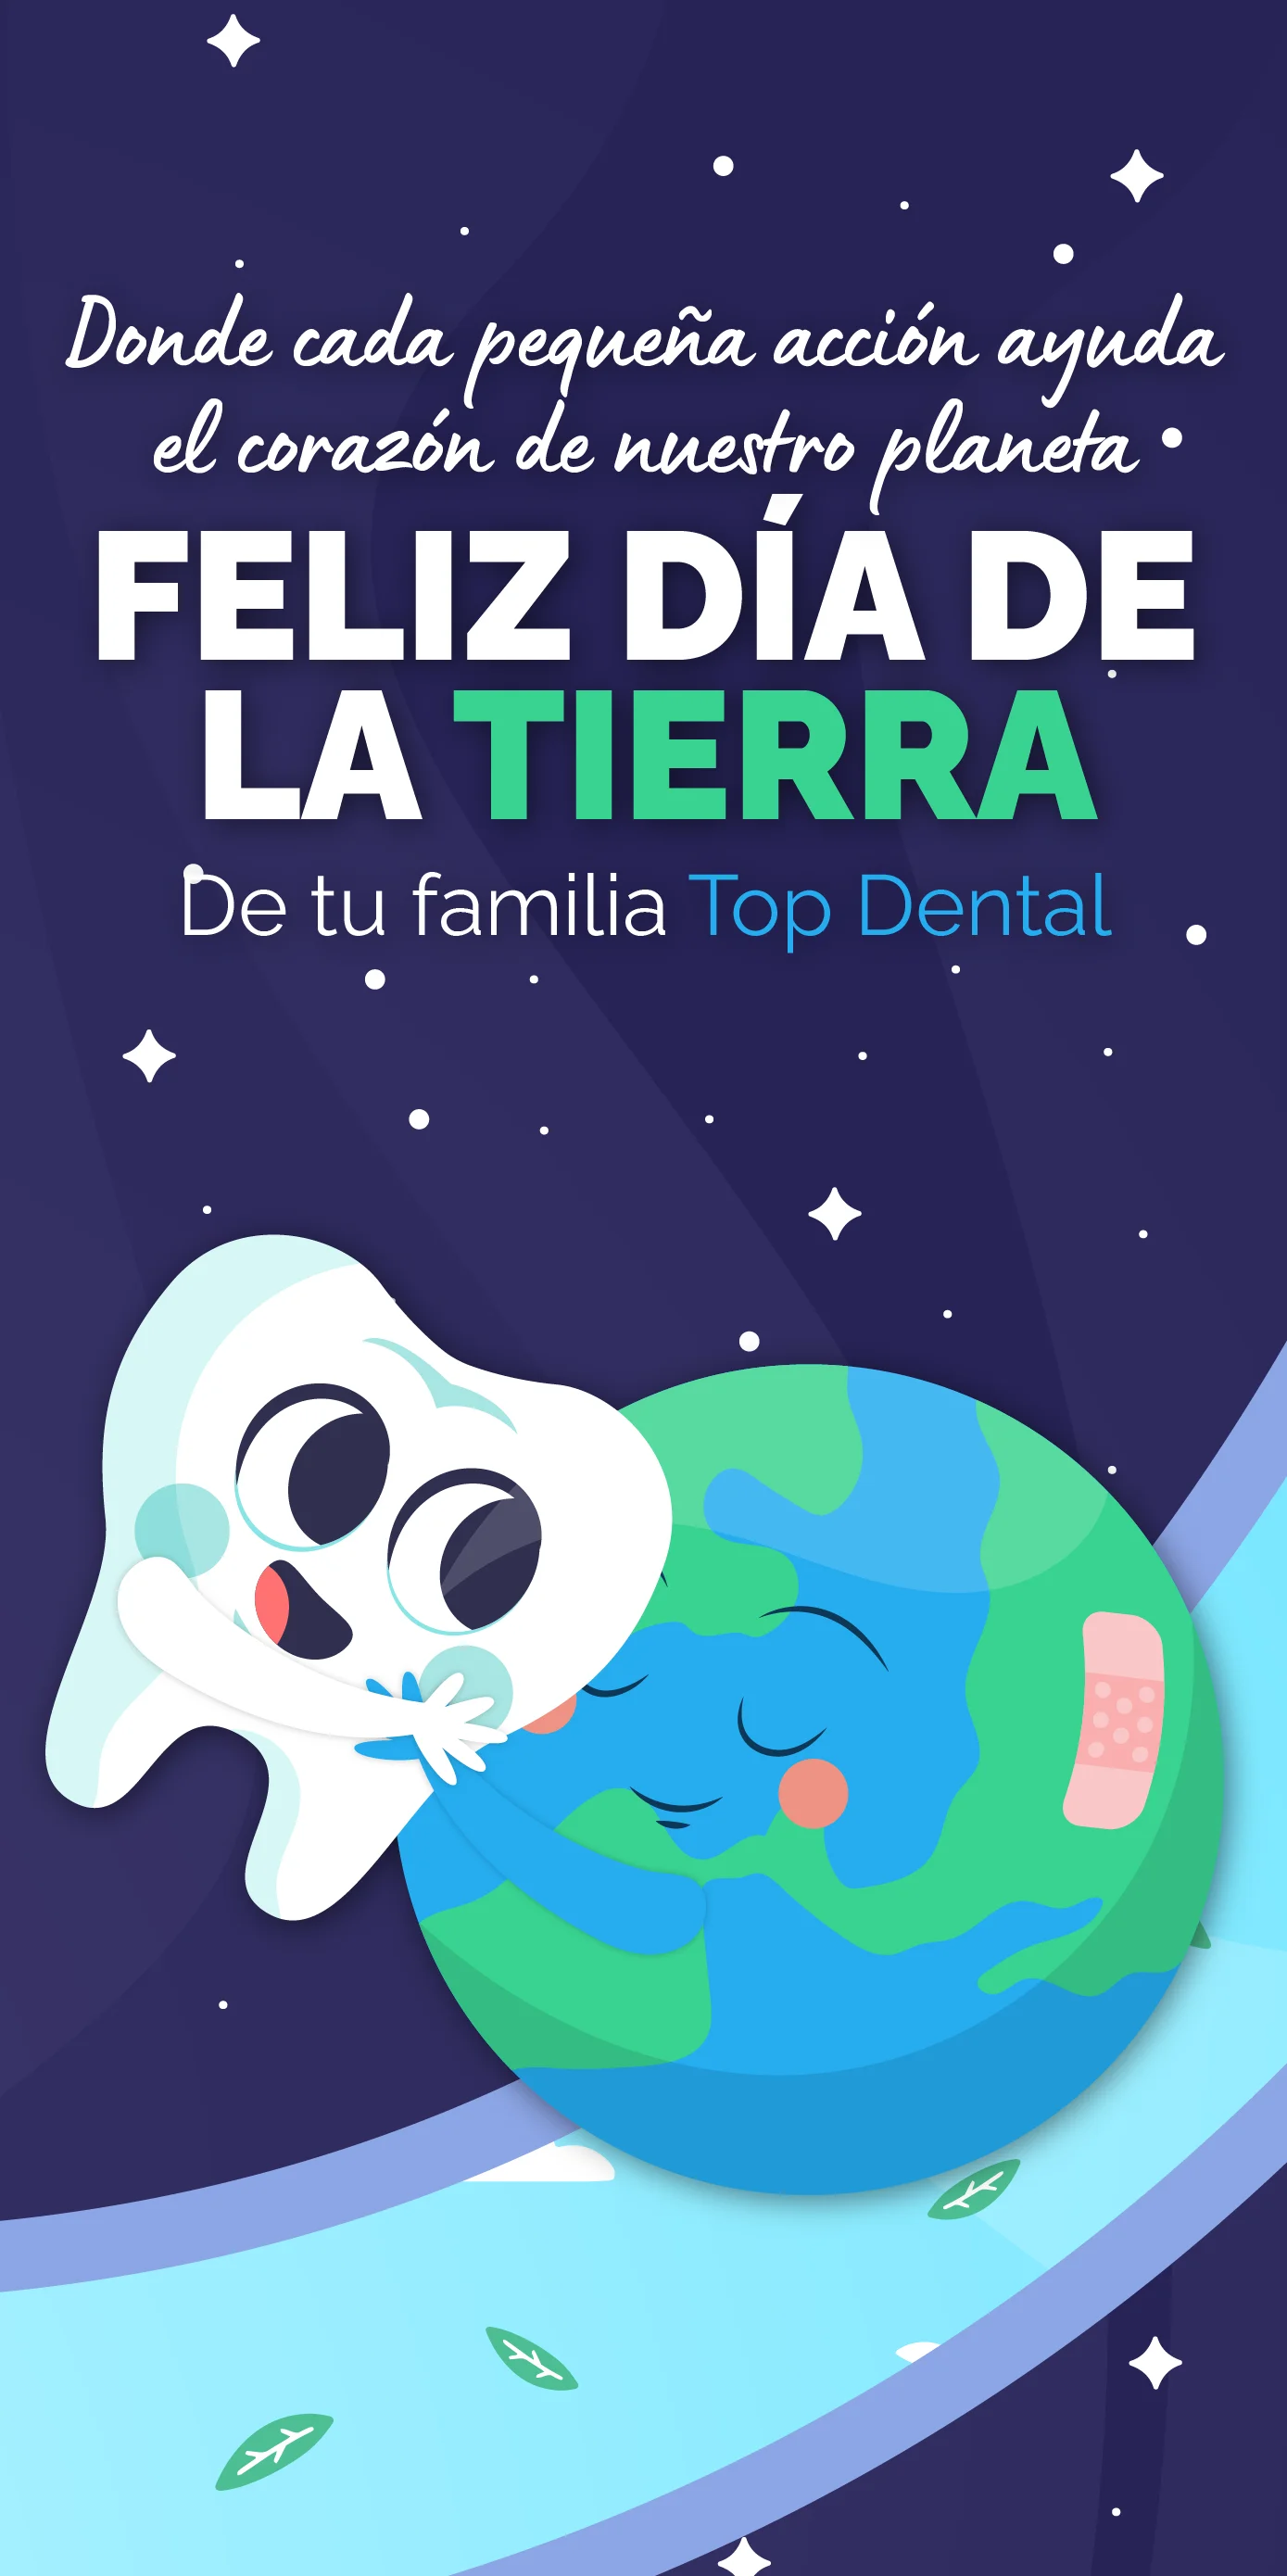 Happy Earth Day - April 22th - Top Dental